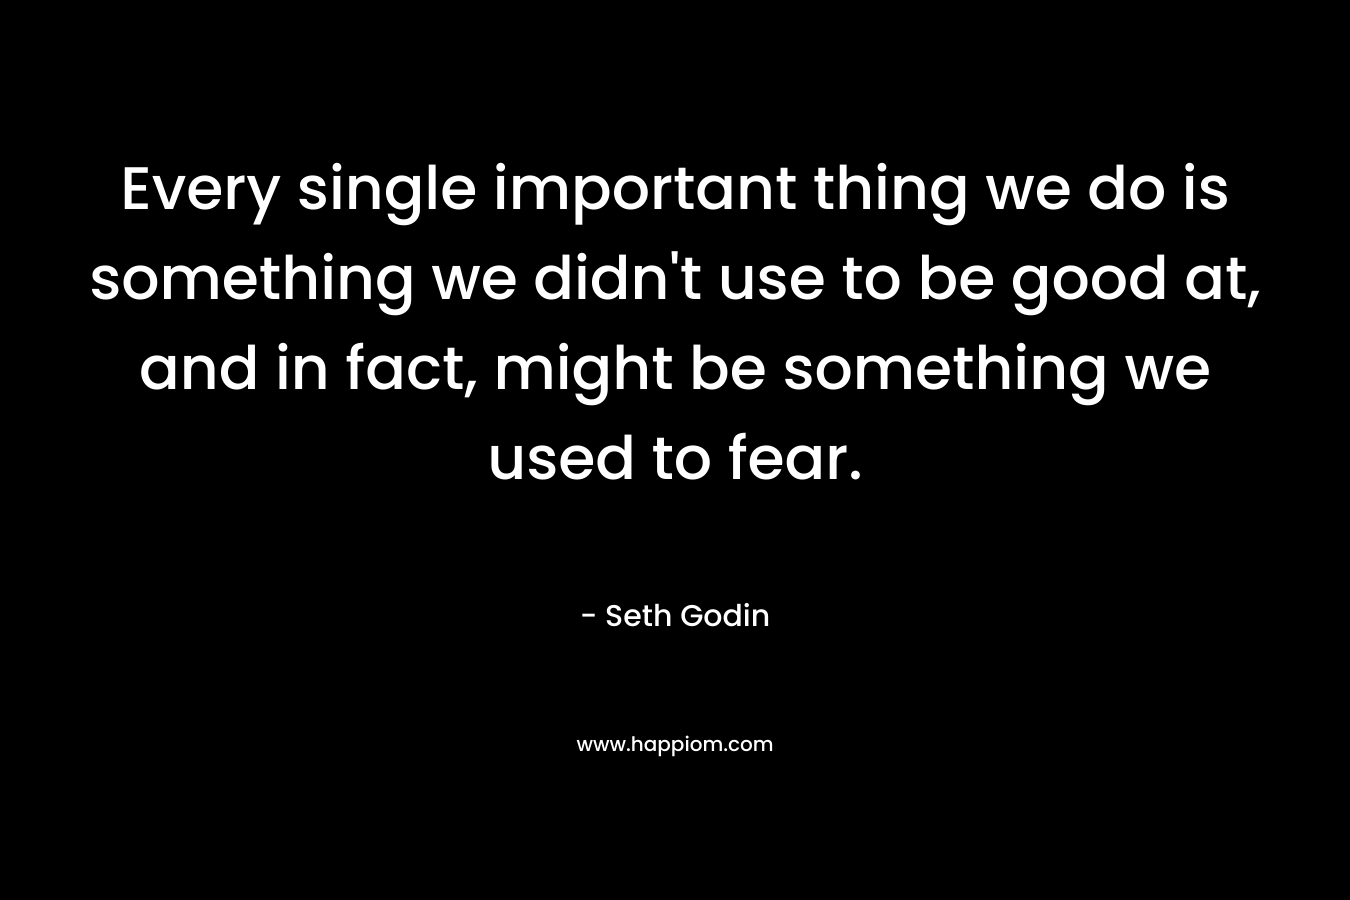 Every single important thing we do is something we didn’t use to be good at, and in fact, might be something we used to fear. – Seth Godin